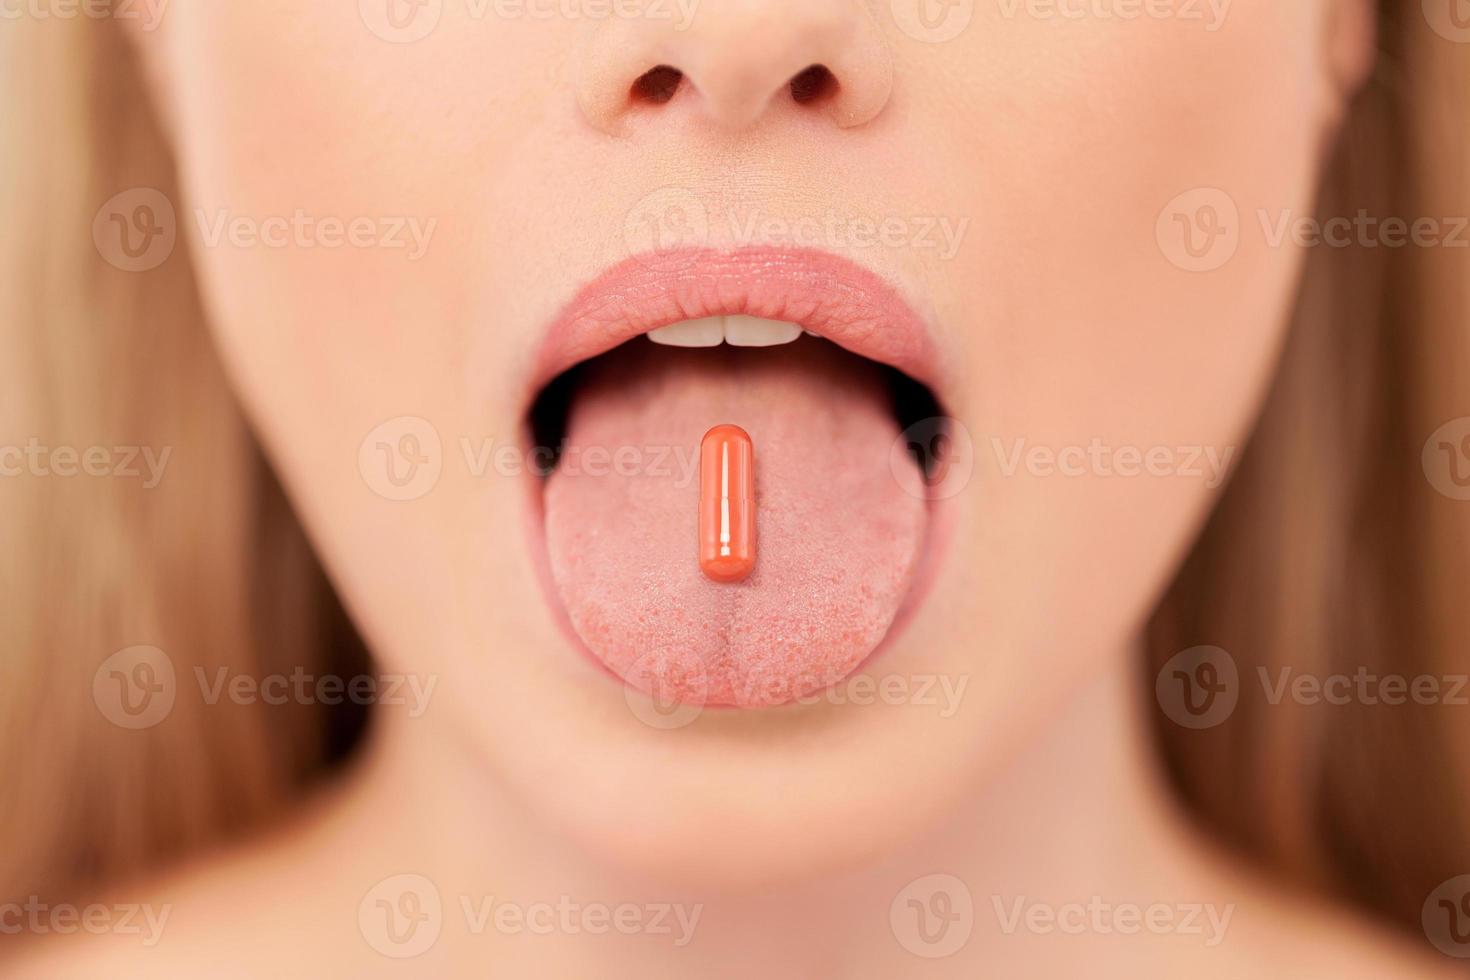 Pill on her tongue. Close-up of young woman holding pill on her tongue photo